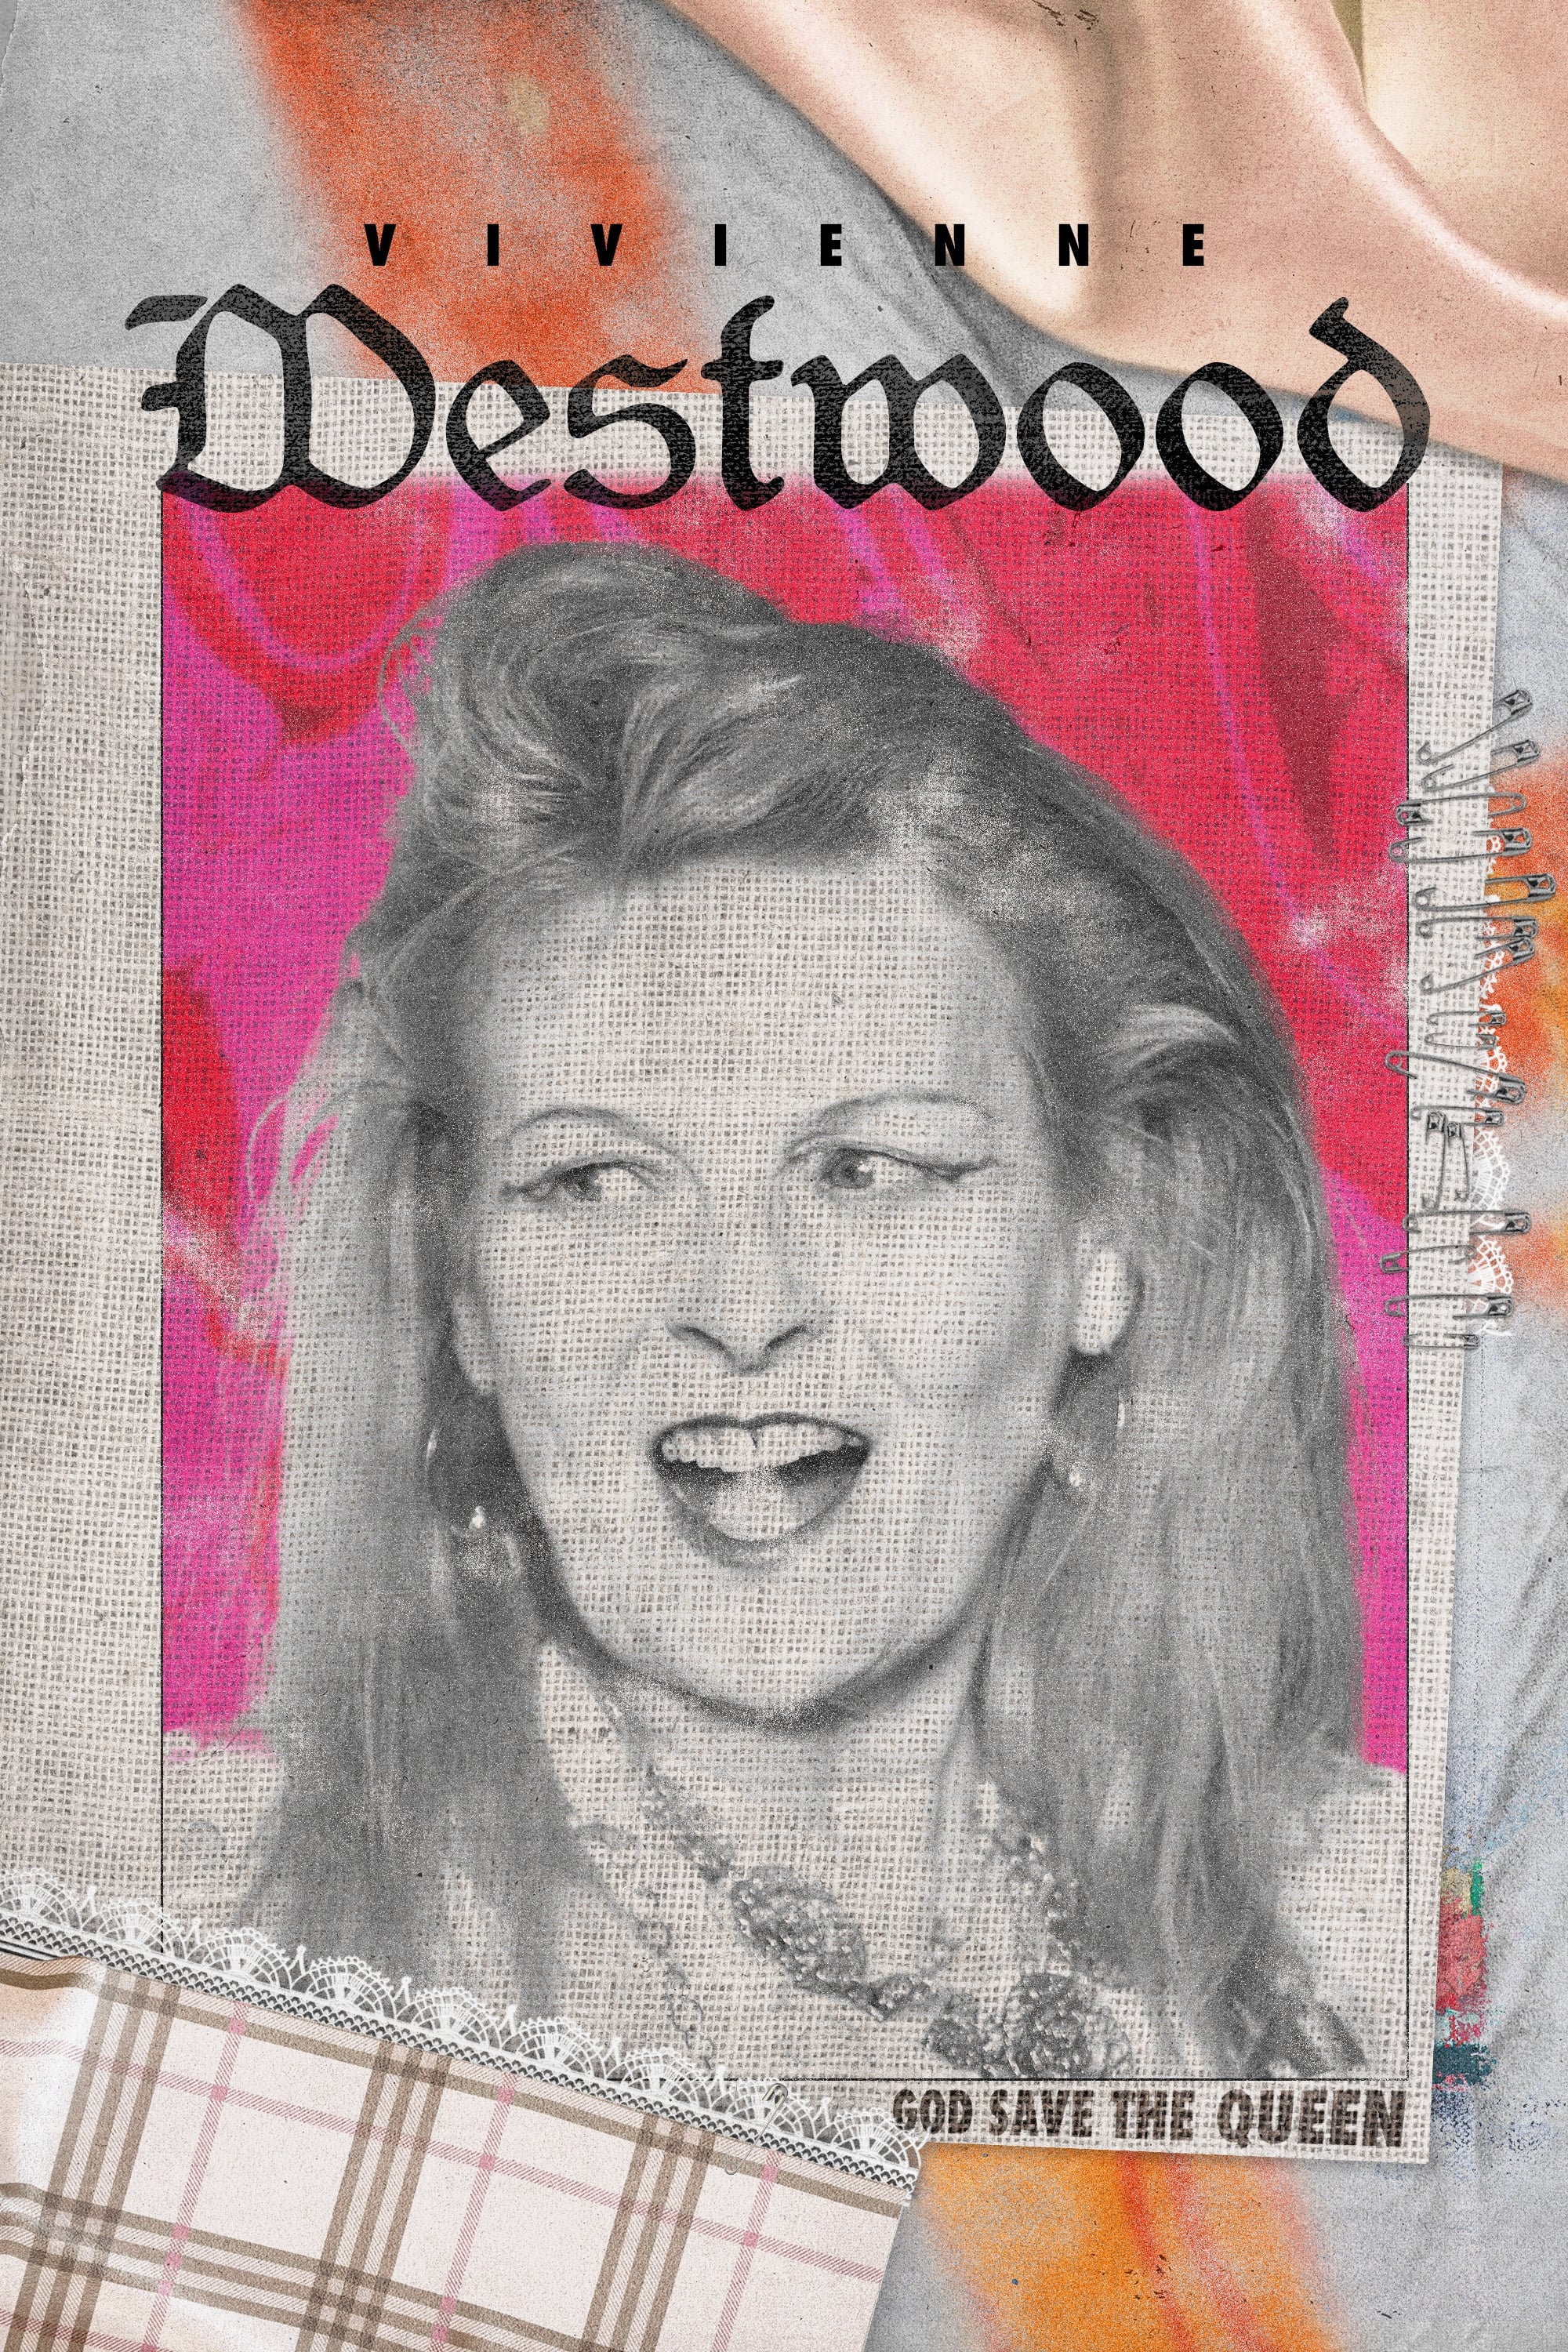 Vivienne Westwood: God Save The Queen